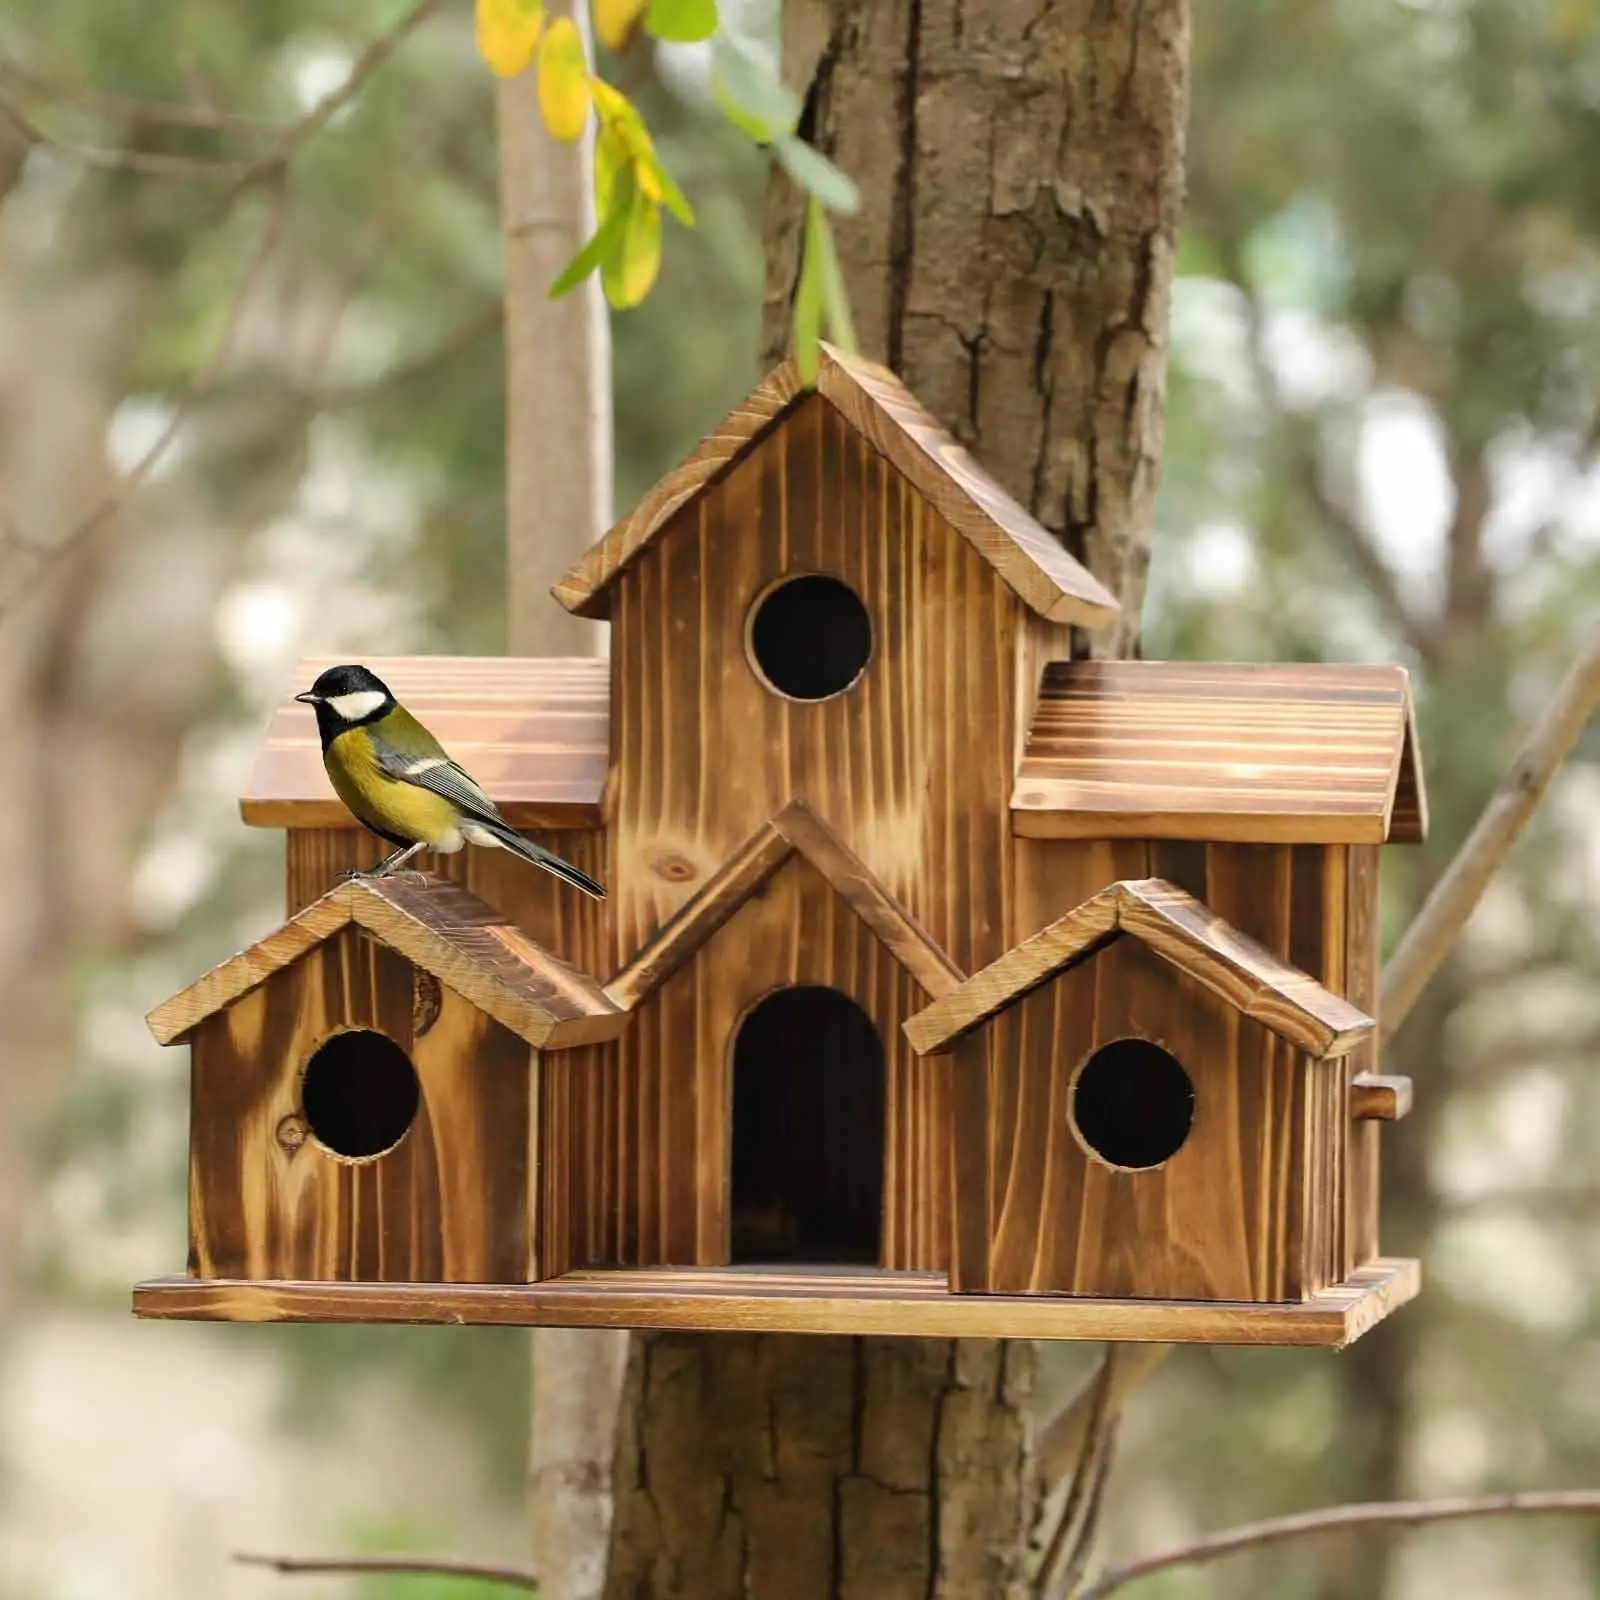 

Hanging Wooden Bird House For Outside, 6 Hole Handmade Natural Birdhouse Large Outdoor Shelter Decorate Backyard/courtyard/ V5e0